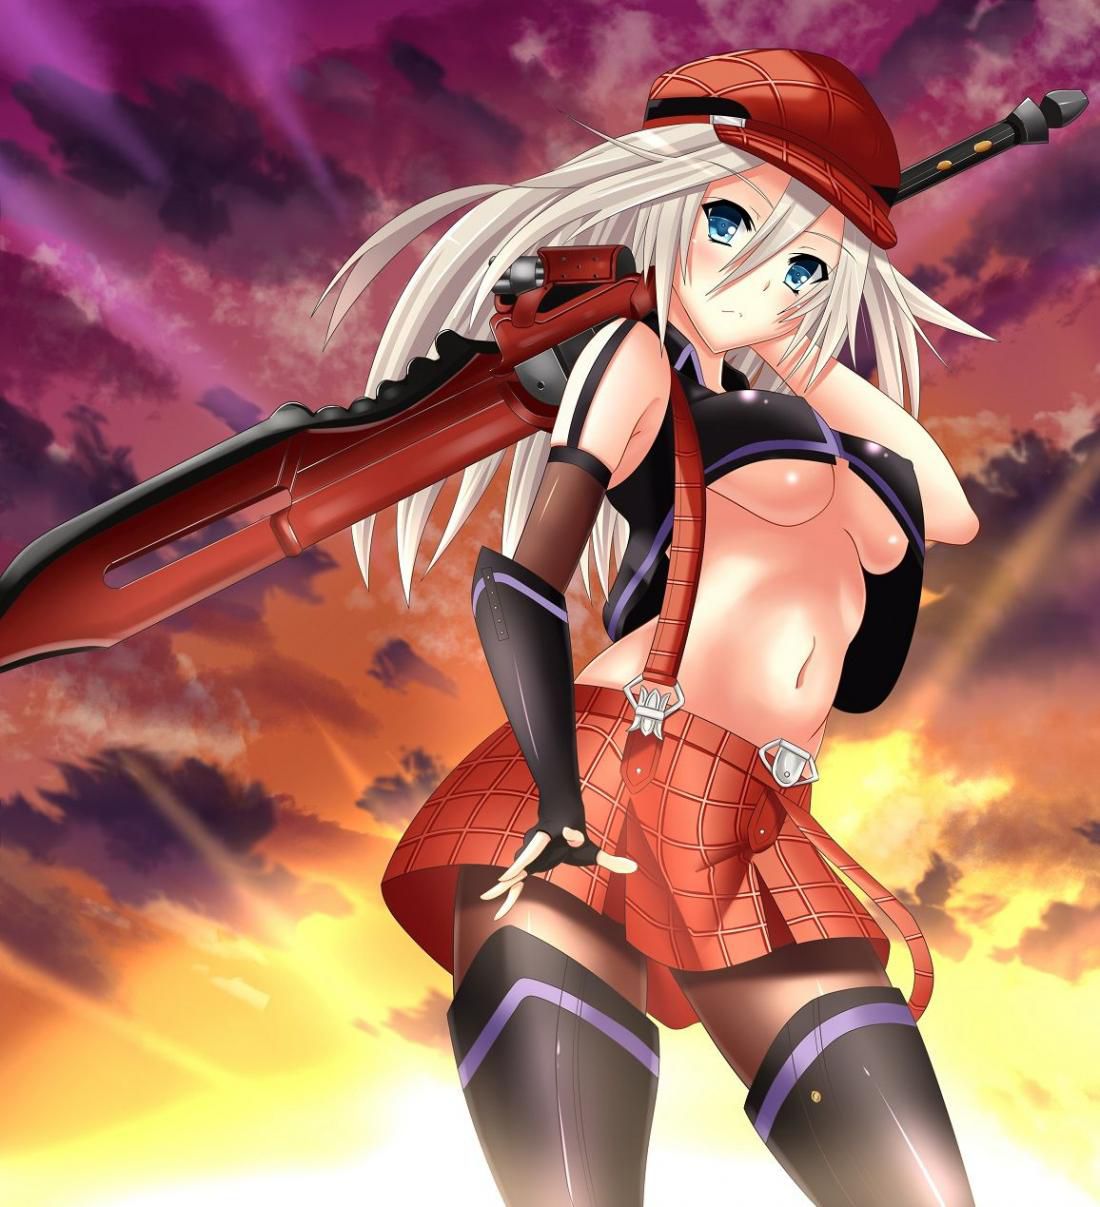 【God Eater】Alisa's cute picture furnace image summary 19